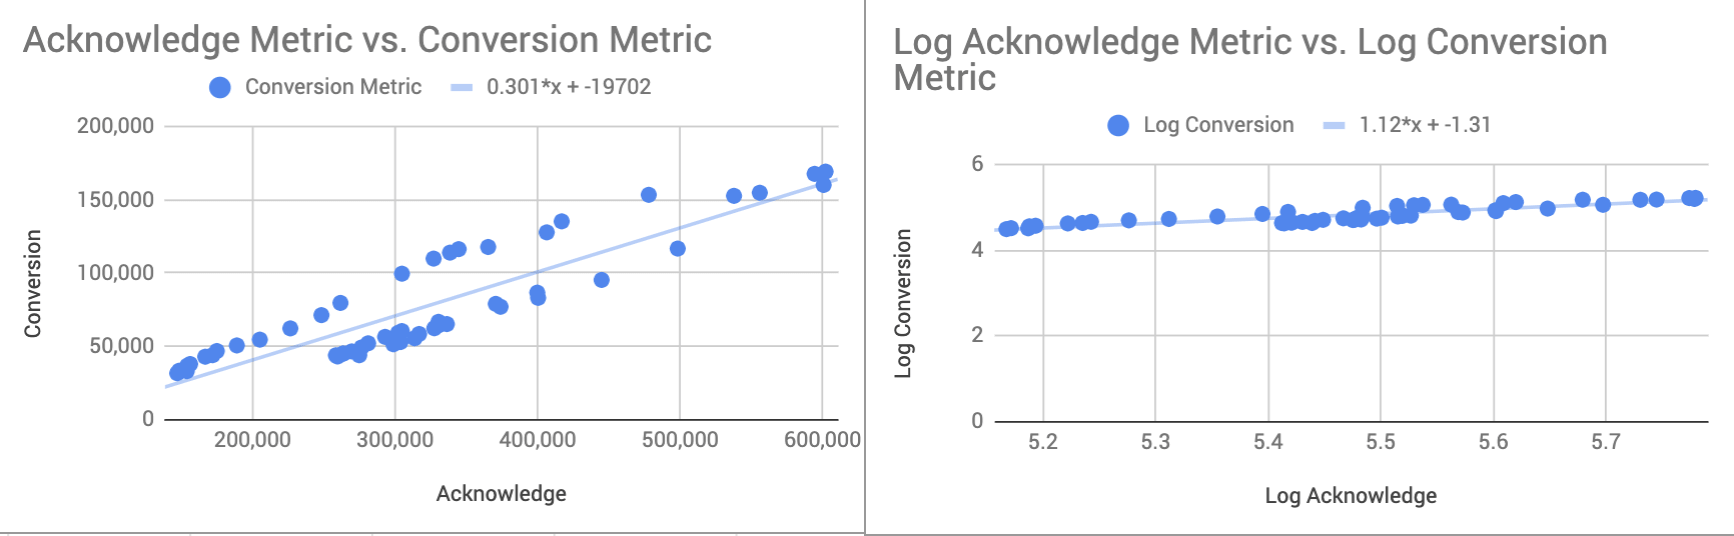 Exploring Correlation and Elasticity between Acknowledge Metric and Conversion Metric 